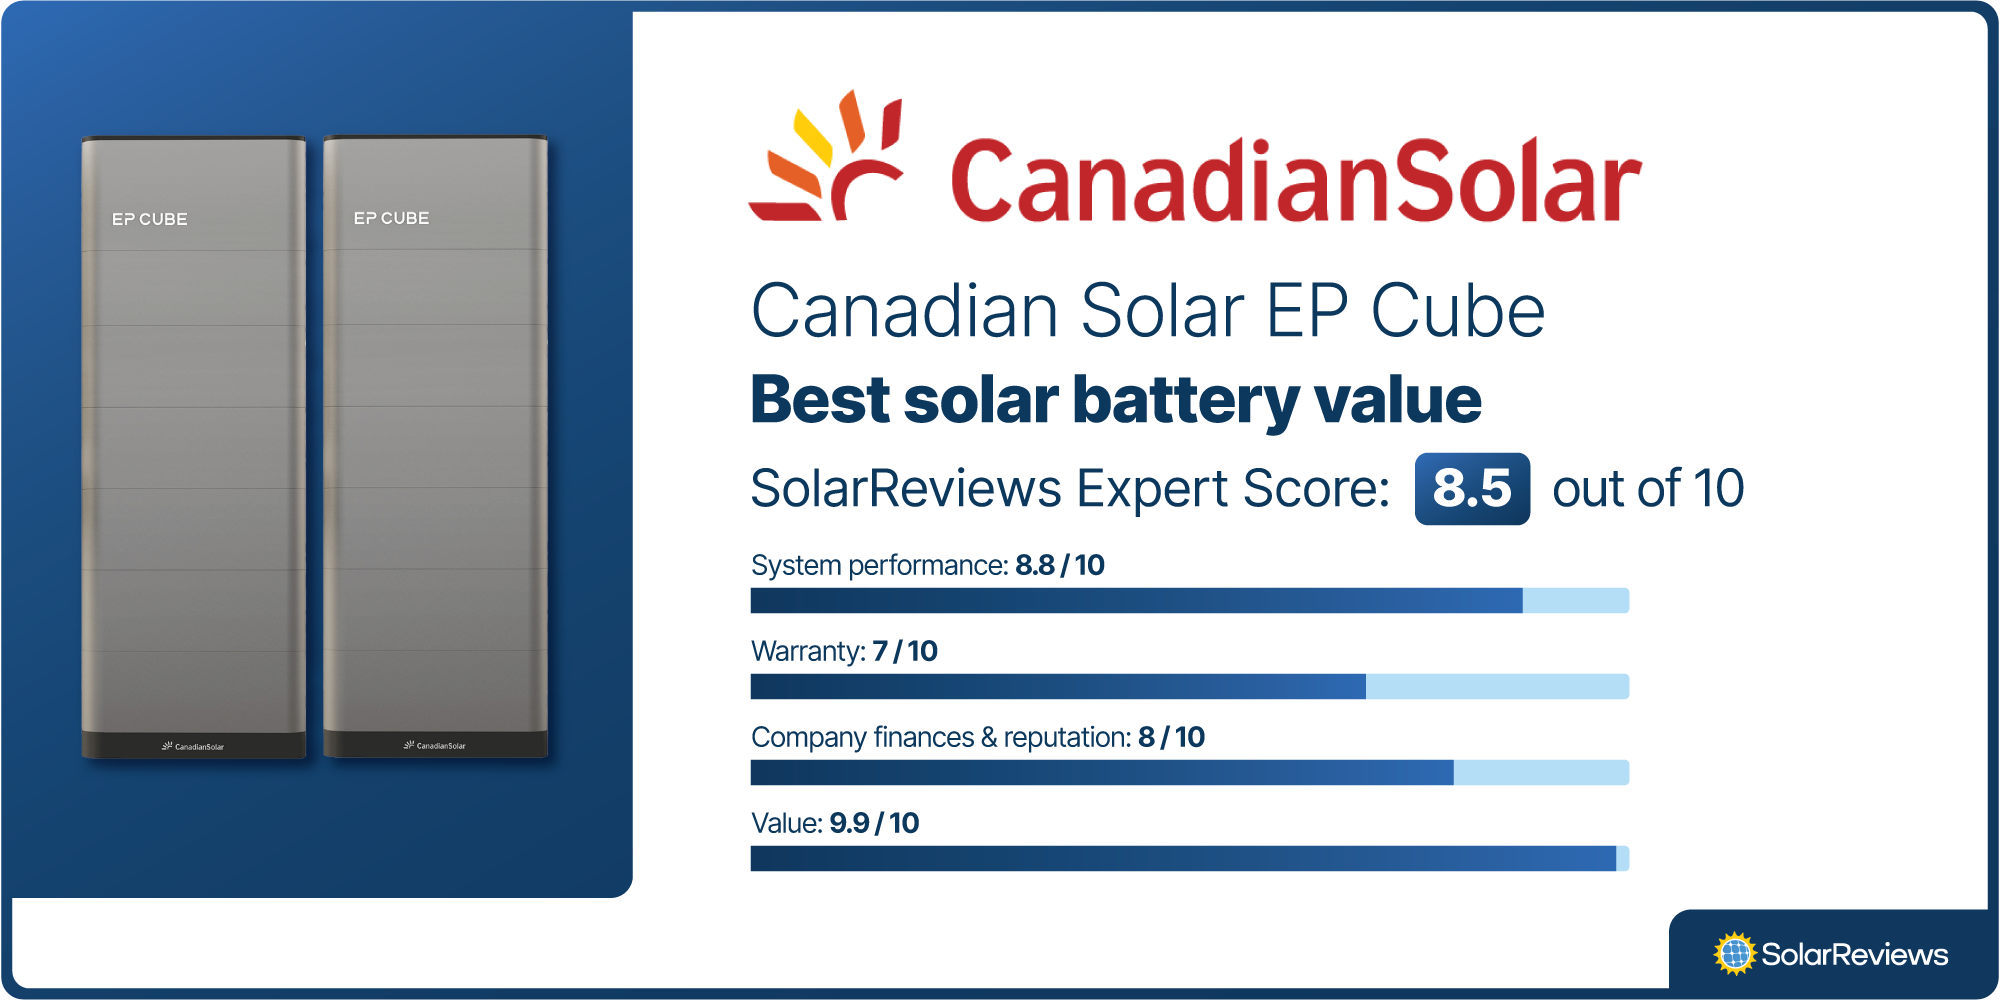 The Canadian Solar EP Cube was voted best solar battery value, with a SolarReviews Expert Score of 8.5/10, scoring highest in system performance, warranty, and company finance and reputation categories.